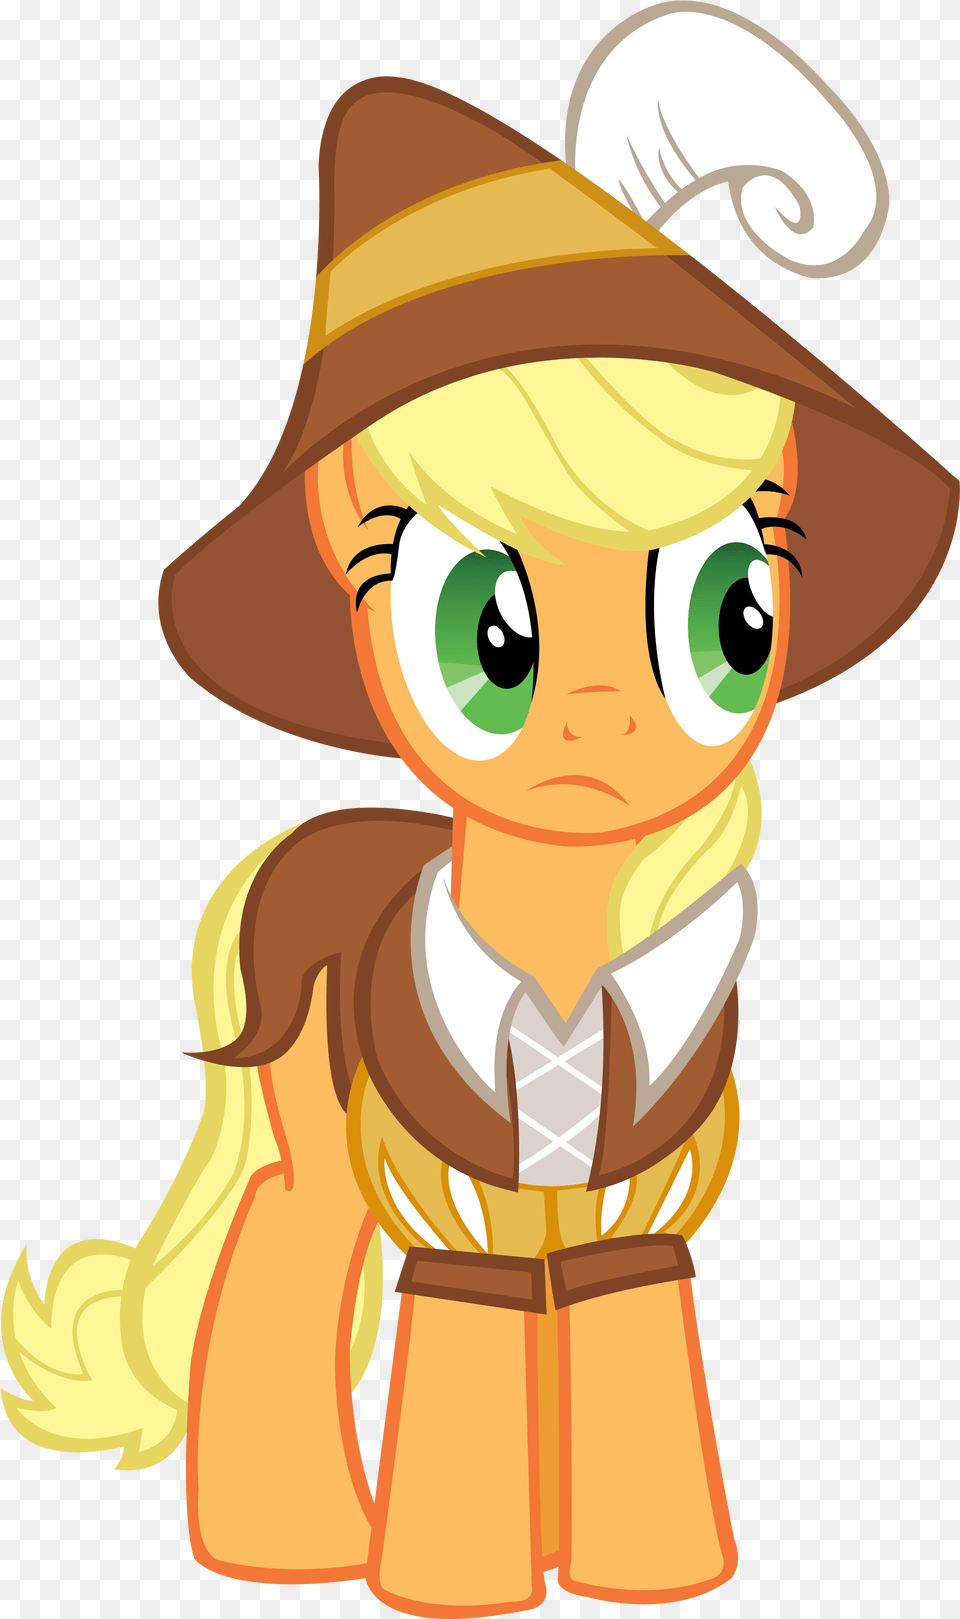 Smart Cookie Clip Art Smart Cookie Applejack By Star My Little Pony Friendship Is Magic, Clothing, Hat, Publication, Baby Png Image